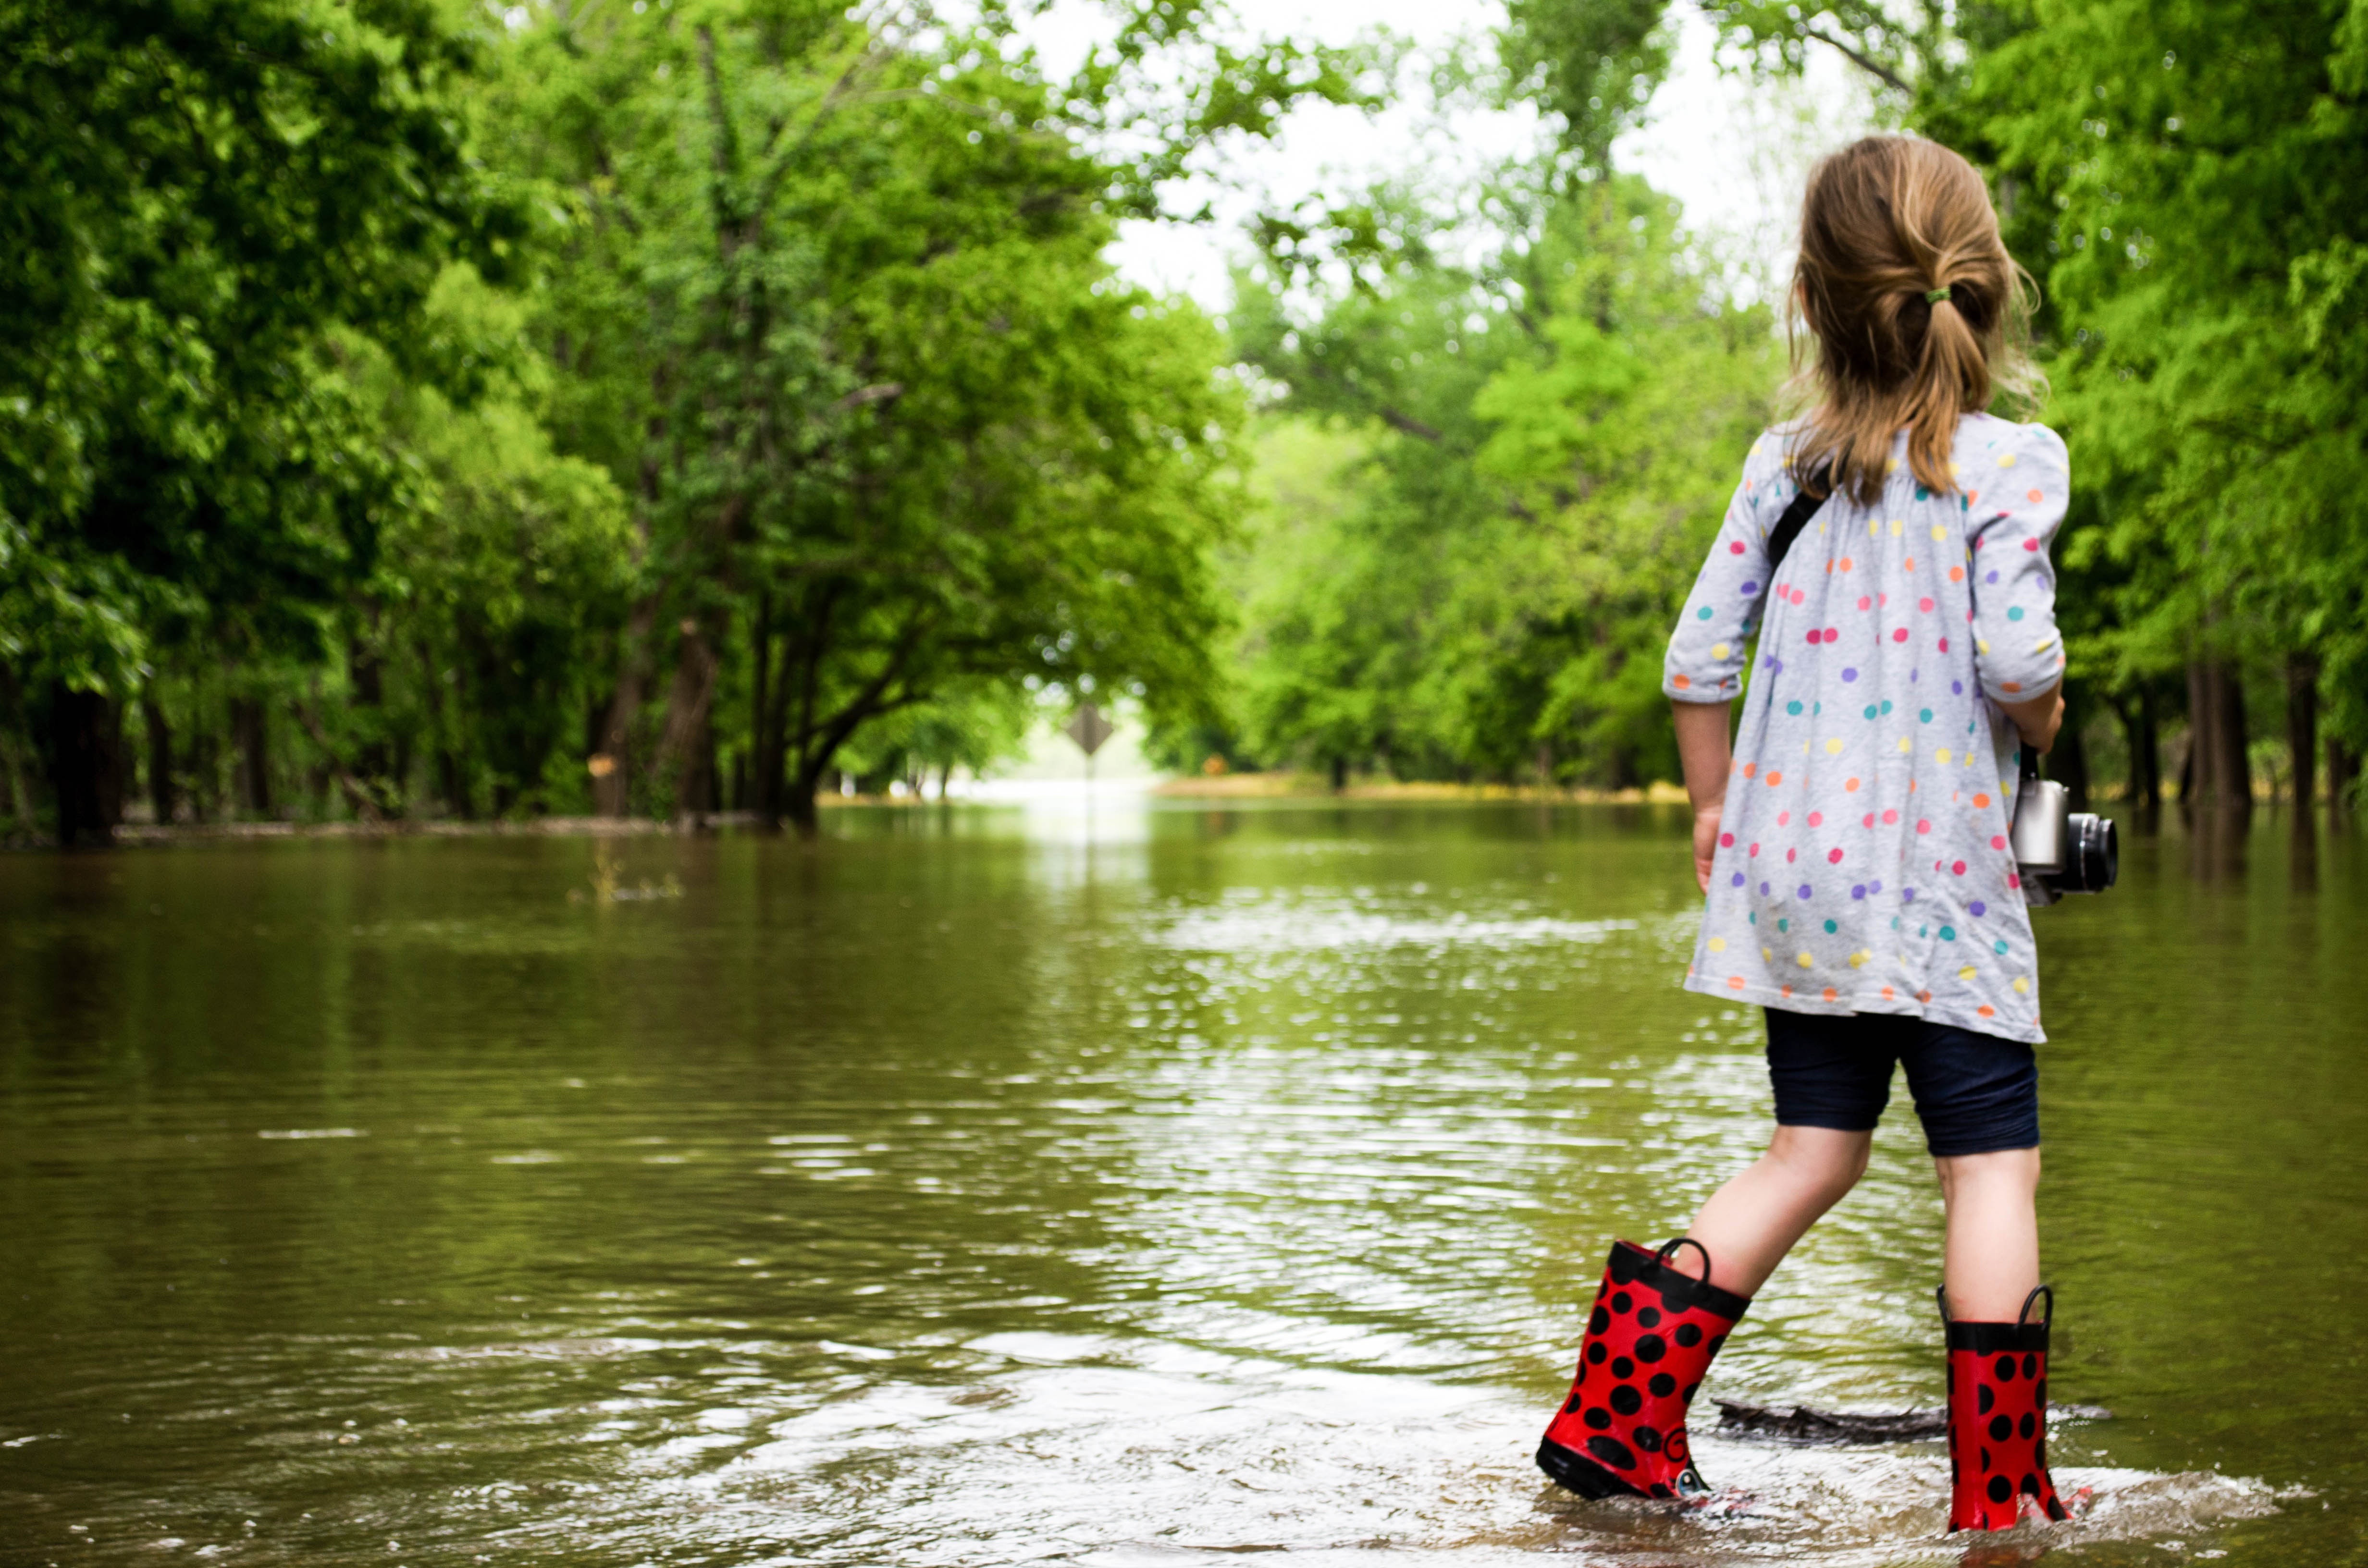 Photo of a young girl in boots standing in shallow water surrounded by trees.